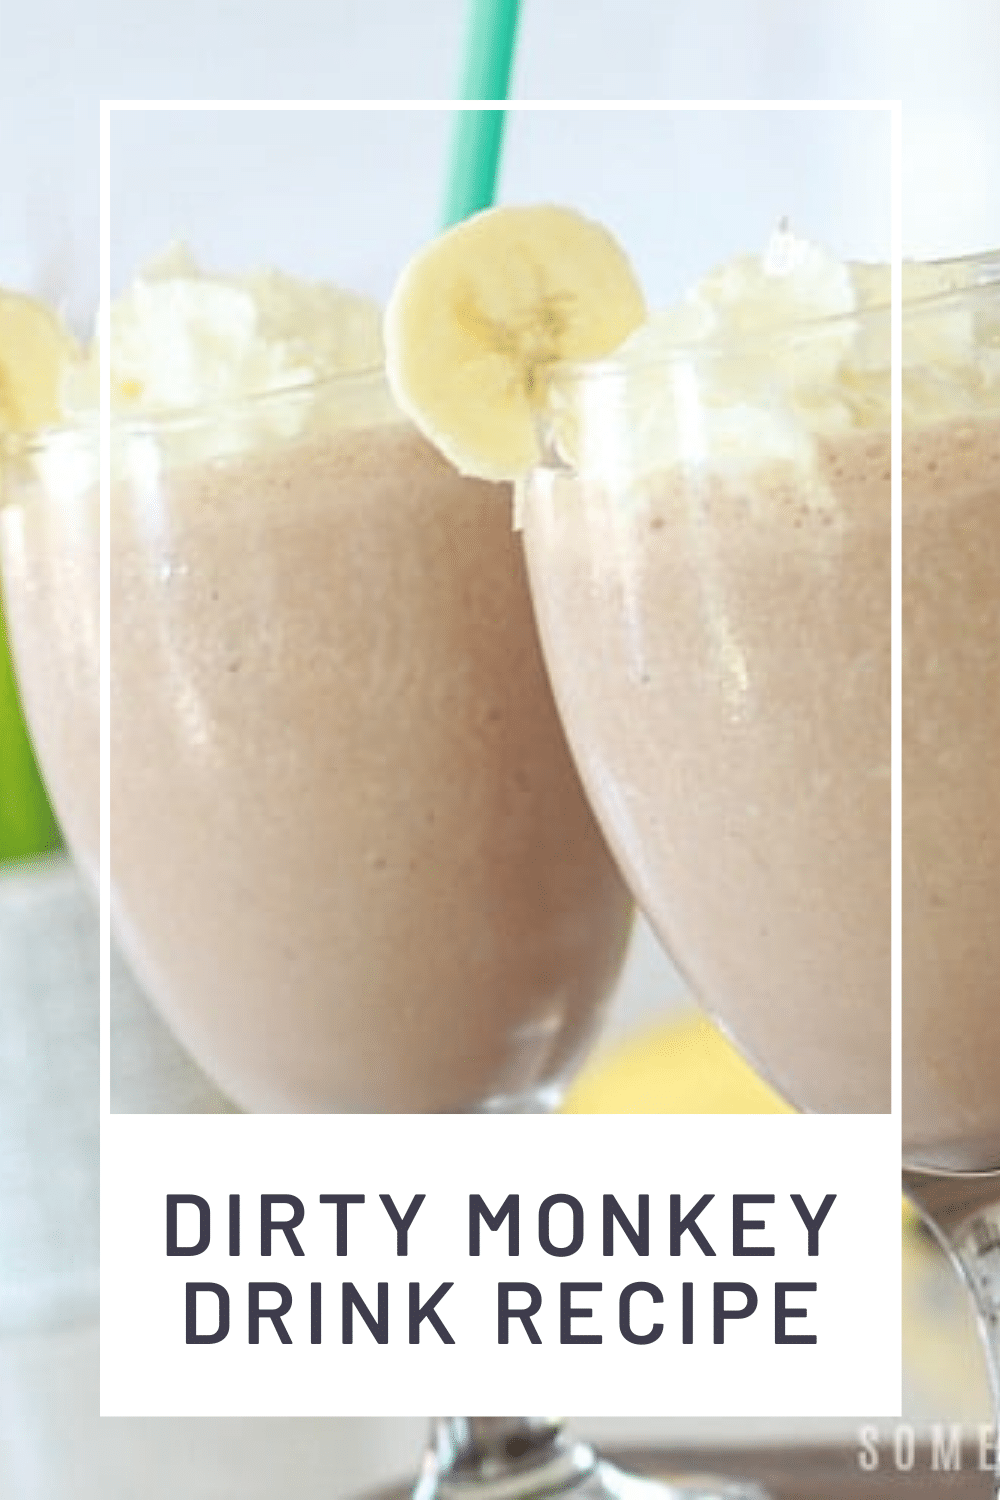 This non-alcoholic dirty monkey drink recipe is a delicious and easy frozen mocktail recipe.  Made with bananas, cream and chocolate, this frozen drink recipe is a refreshing option for a sunny day. Some people call them dirty bananas or dirty monkeys but no matter what you call them, they're delicious! via @somewhatsimple